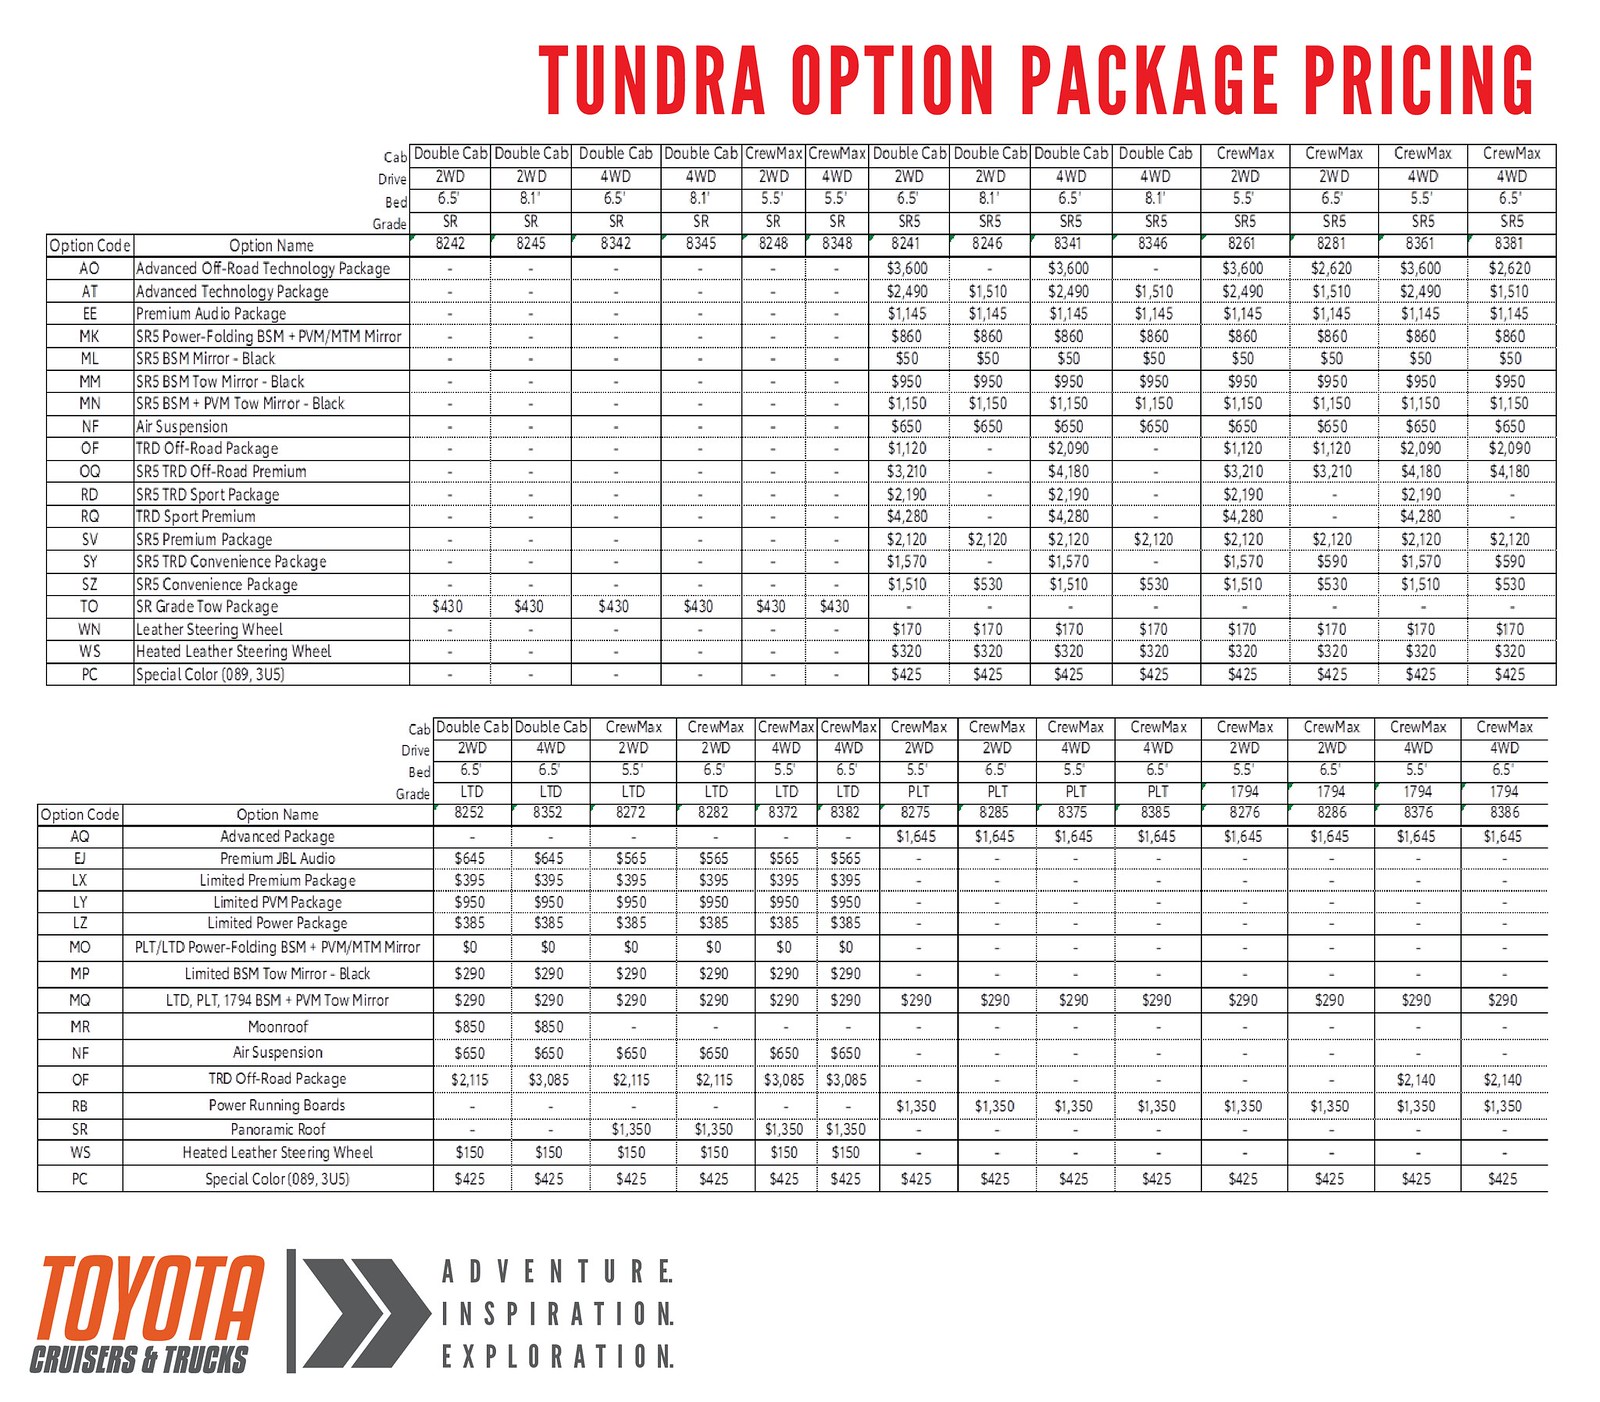 2022 Tundra option package pricing